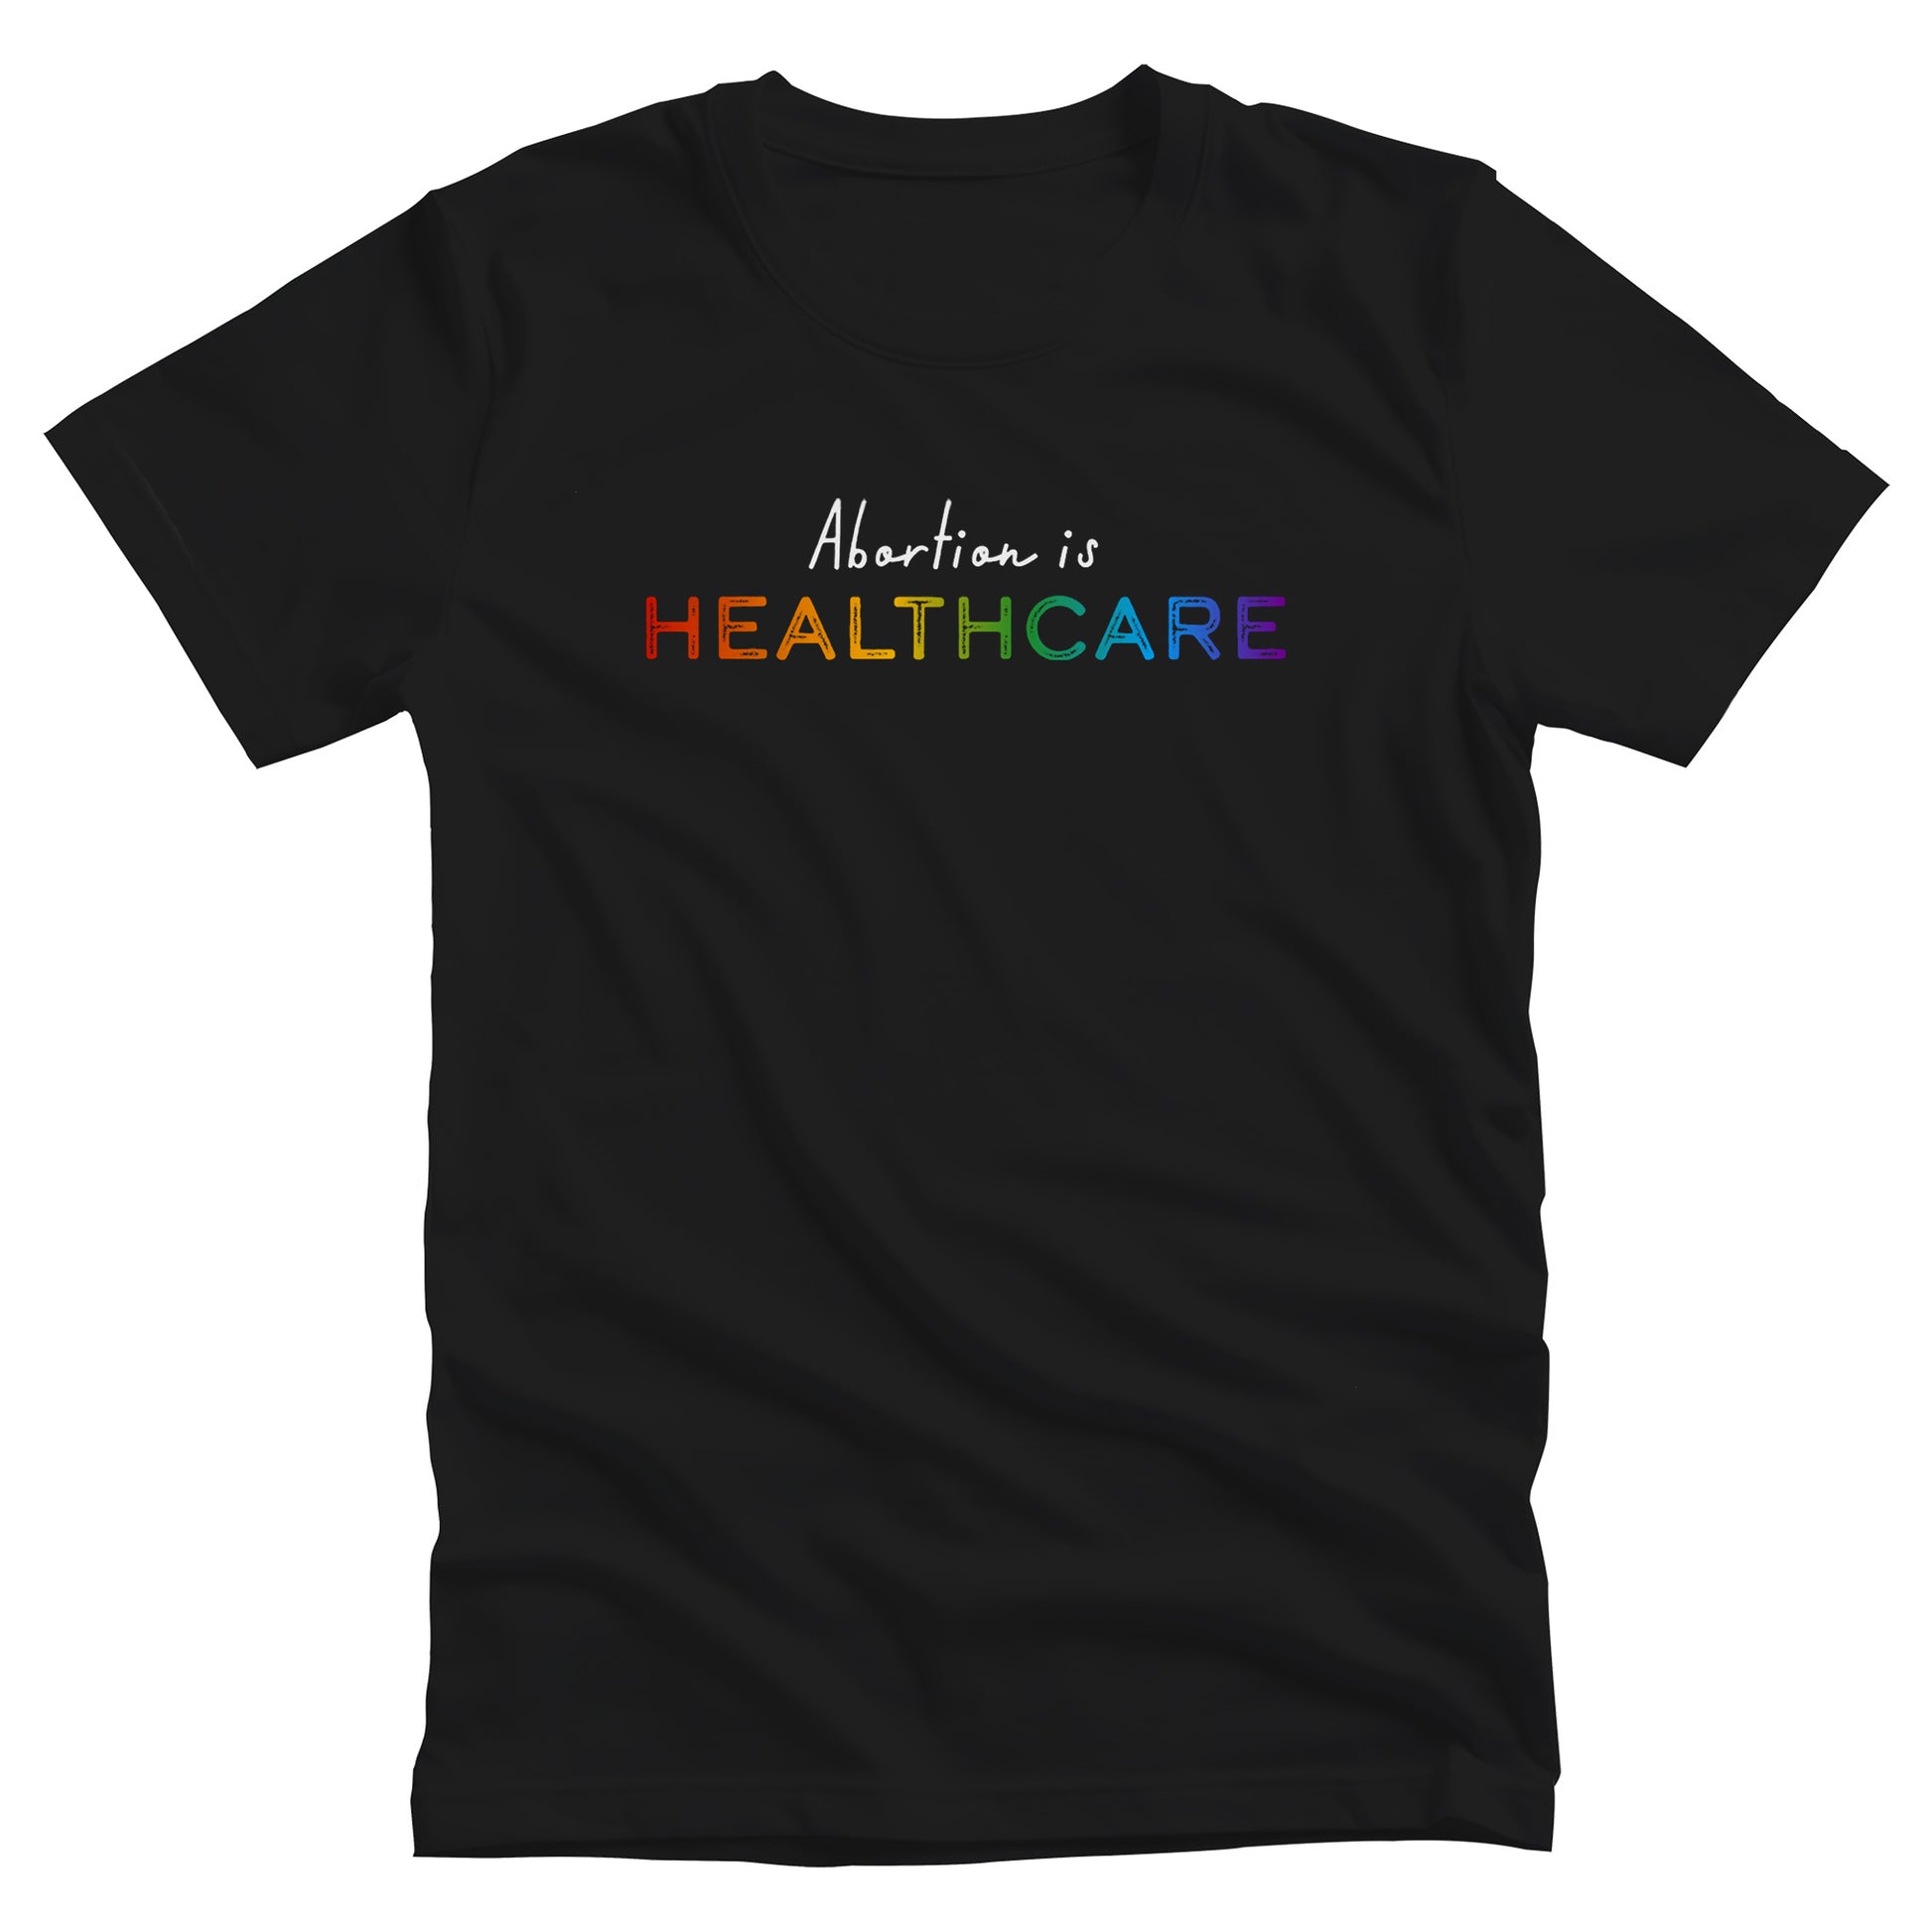 Black unisex t-shirt that says, “Abortion is Healthcare.” The words “Abortion is” is in a script font, and “Healthcare” is in all caps in a rainbow gradient color.